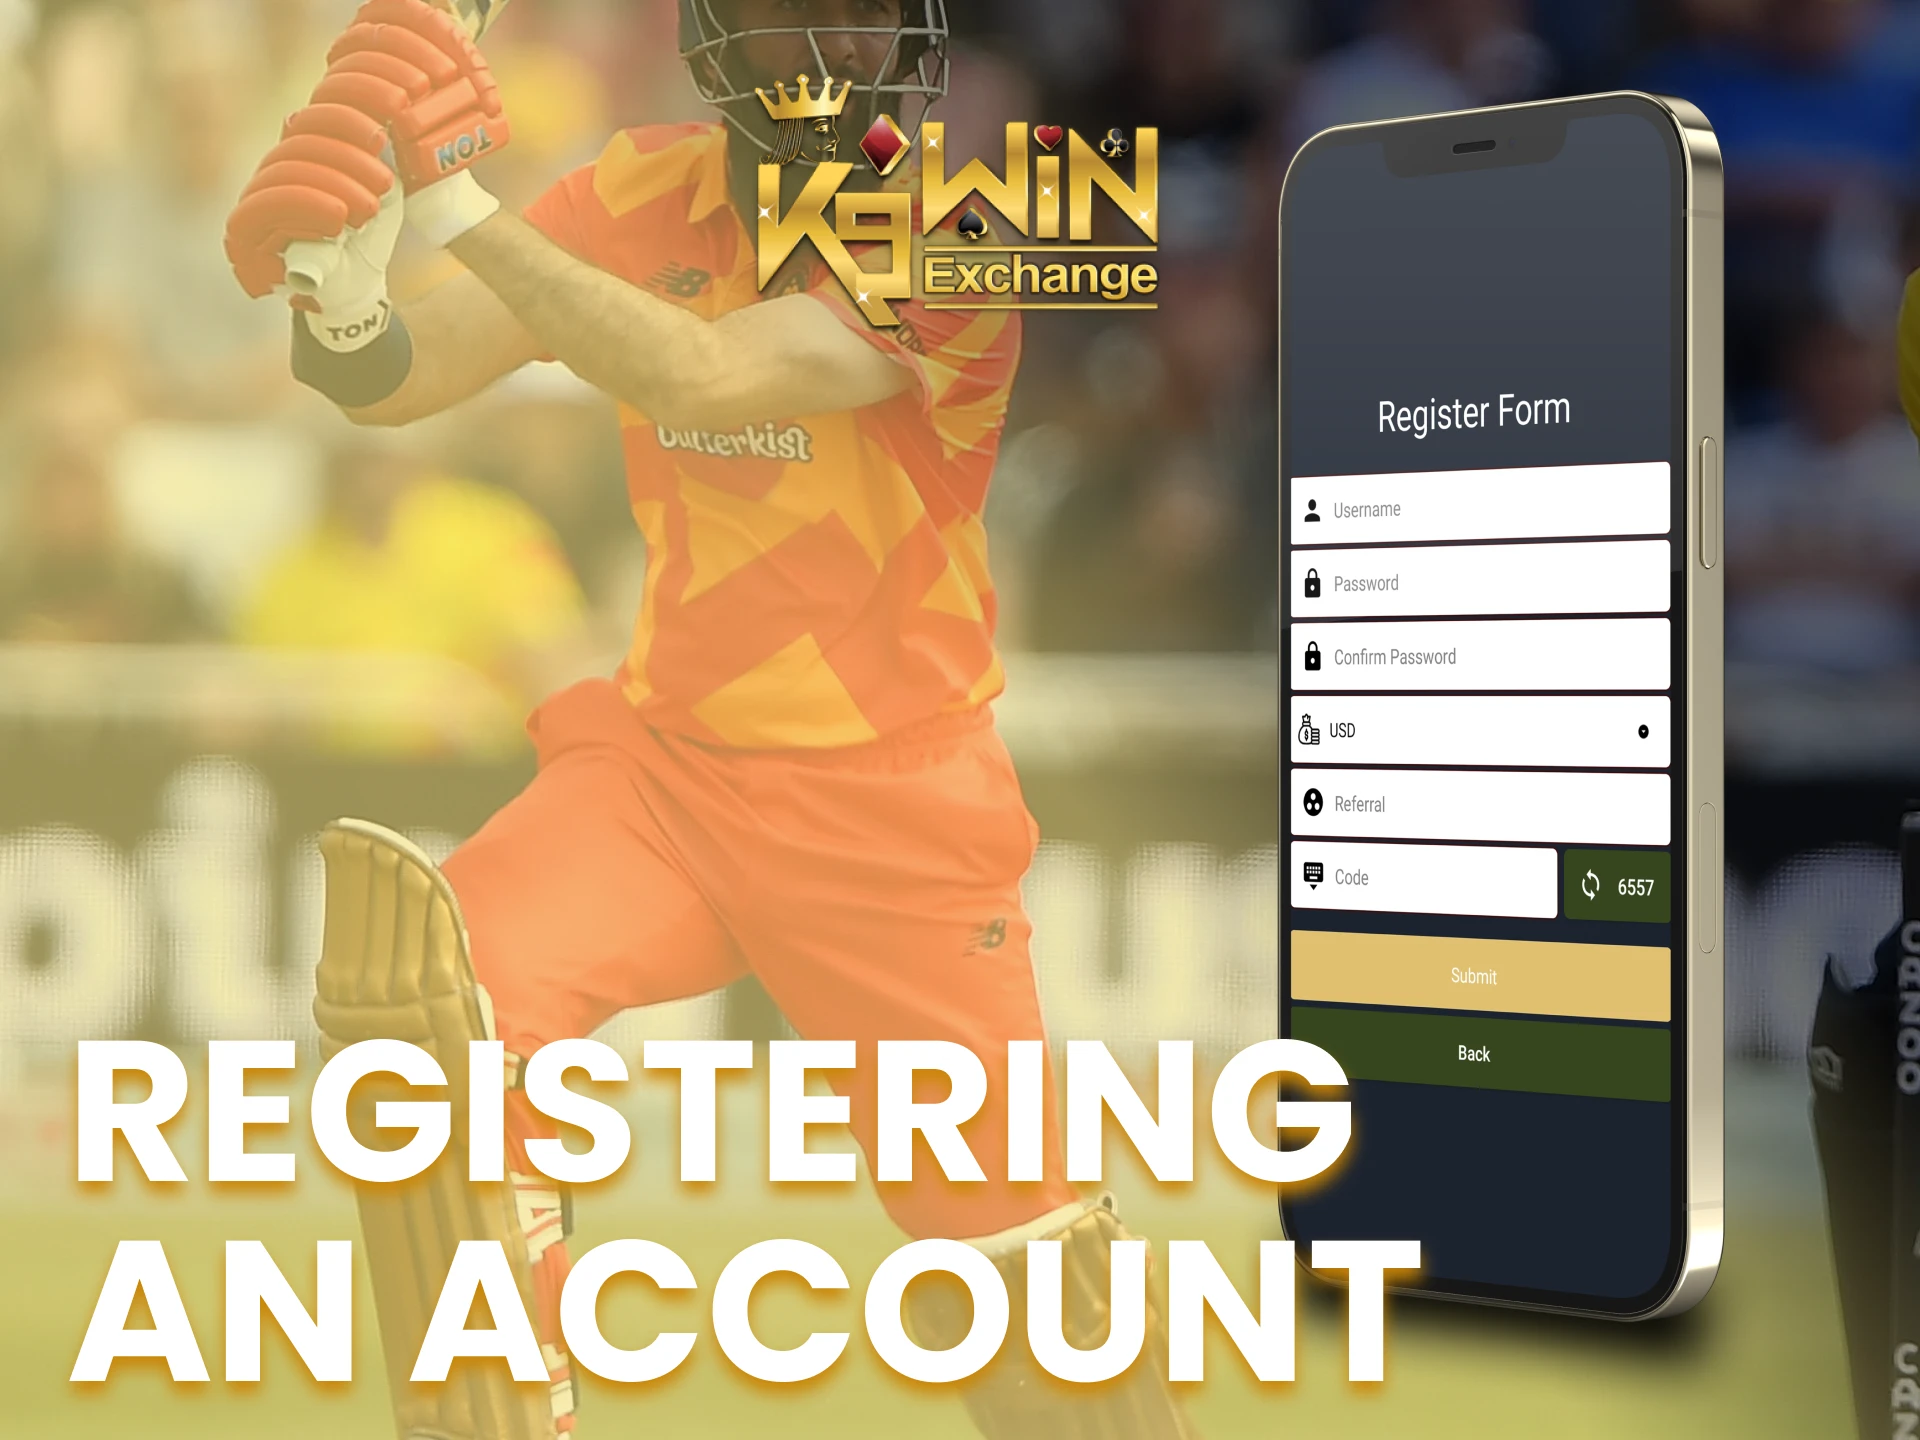 Make a new K9Win account quicker with the app.